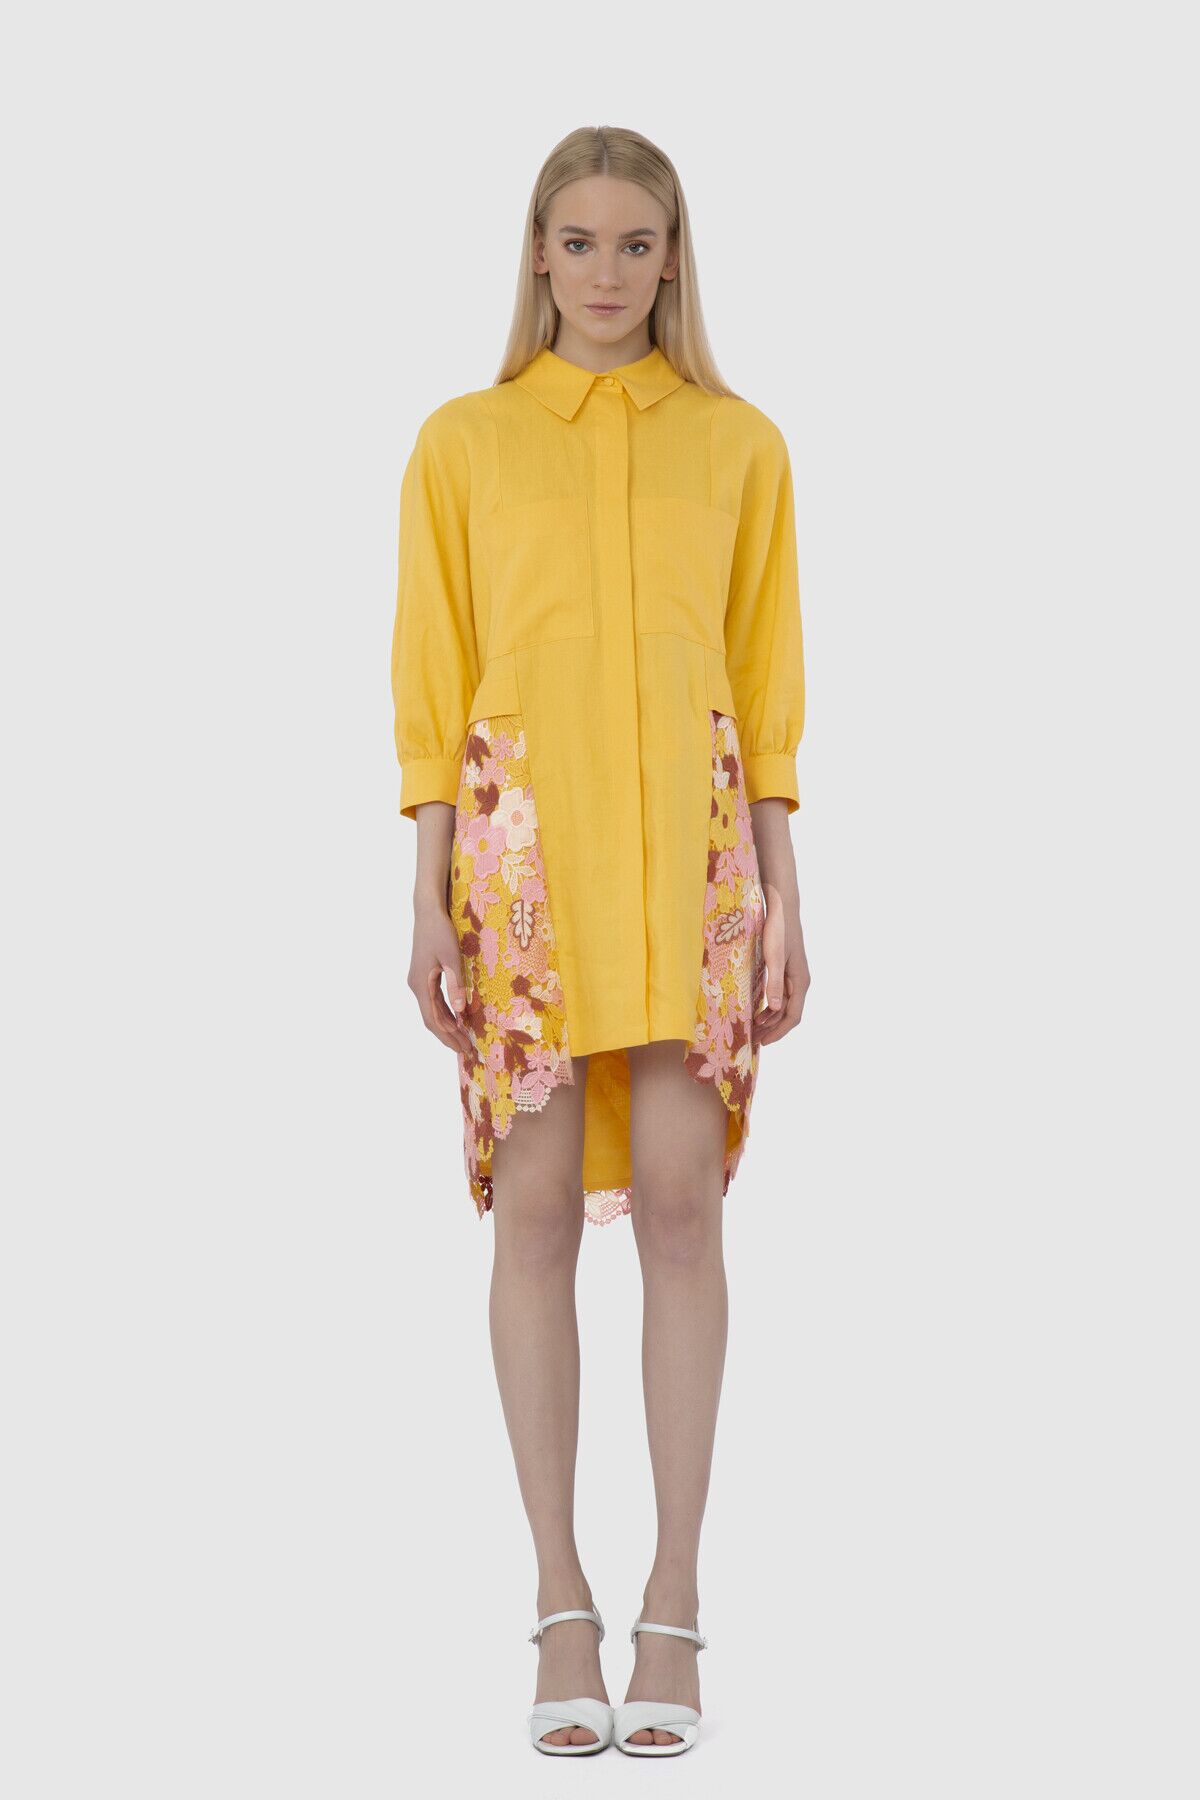 GIZIA - Floral Embroidered Detailed Yellow Shirt Dress